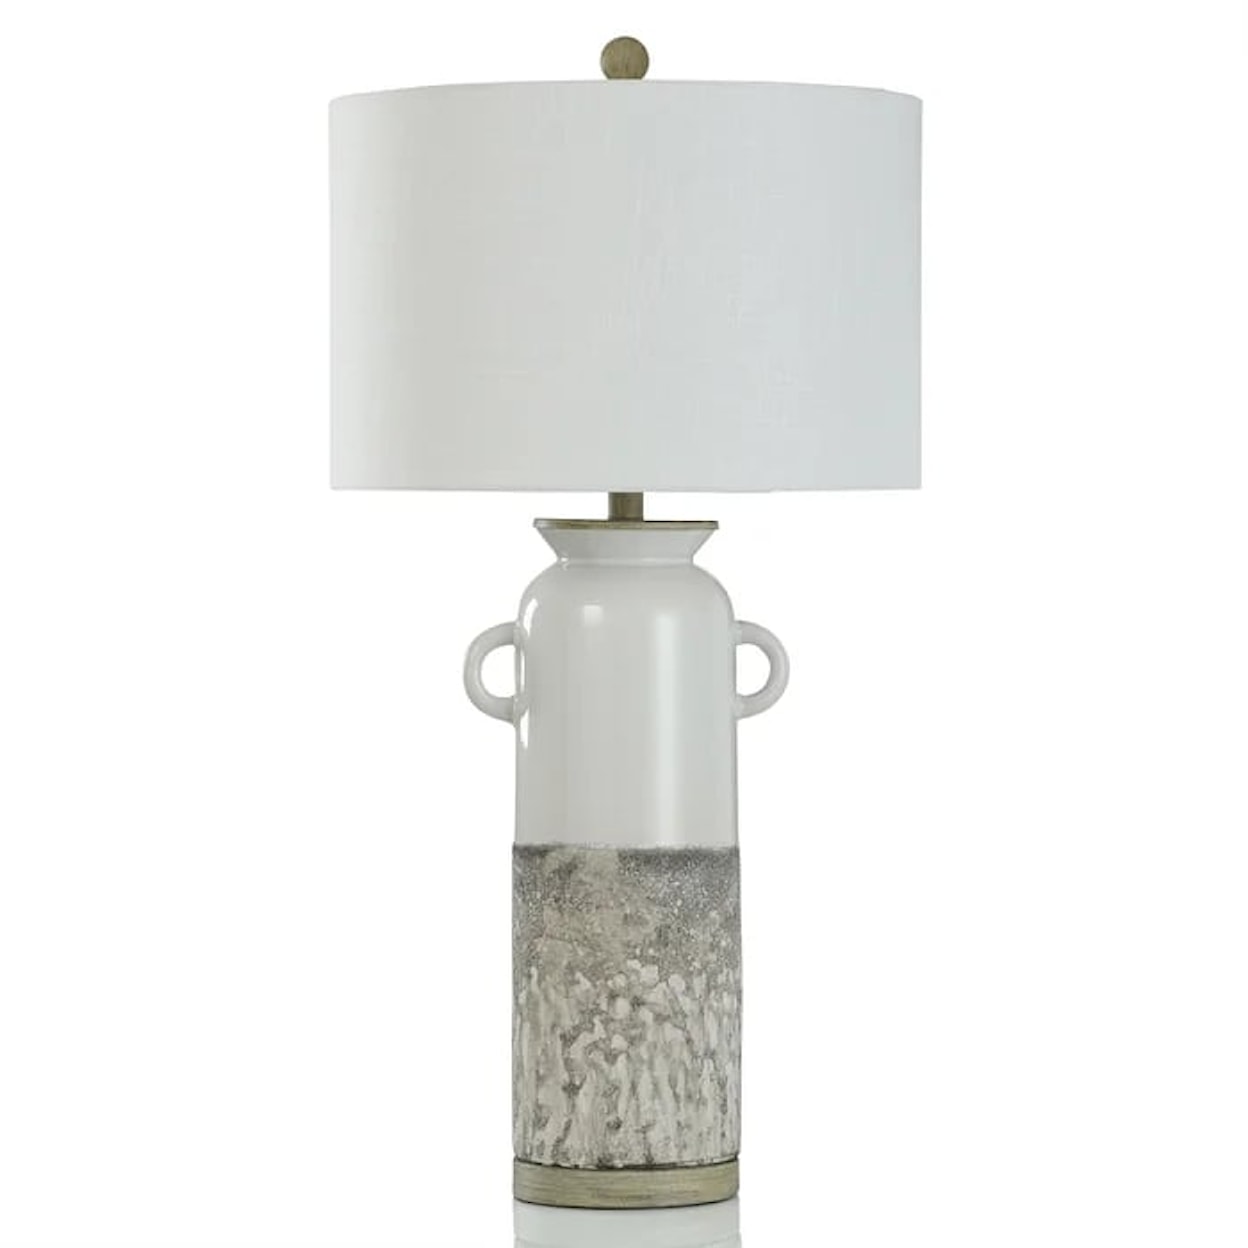 StyleCraft Lamps Cynder Grey Table Lamp